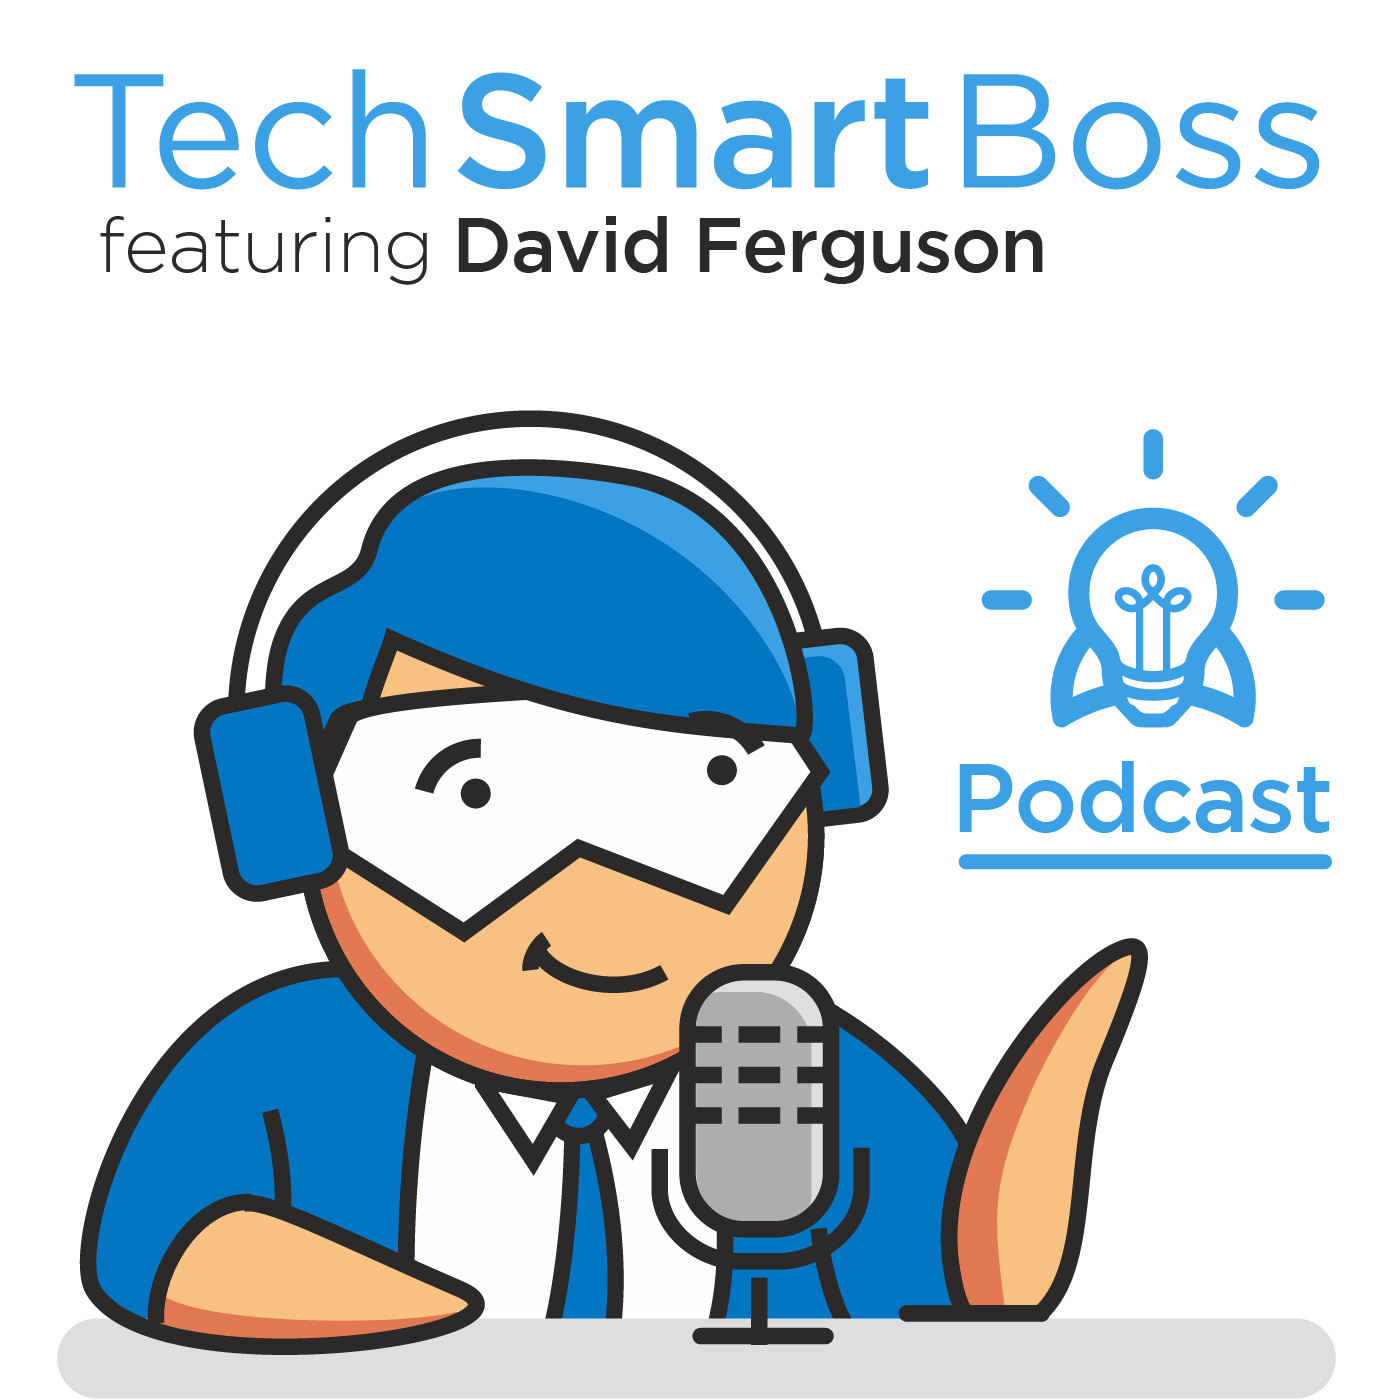 Episode 120: What Is A Kanban Board (And How Does A Tech Smart Boss Use Them)